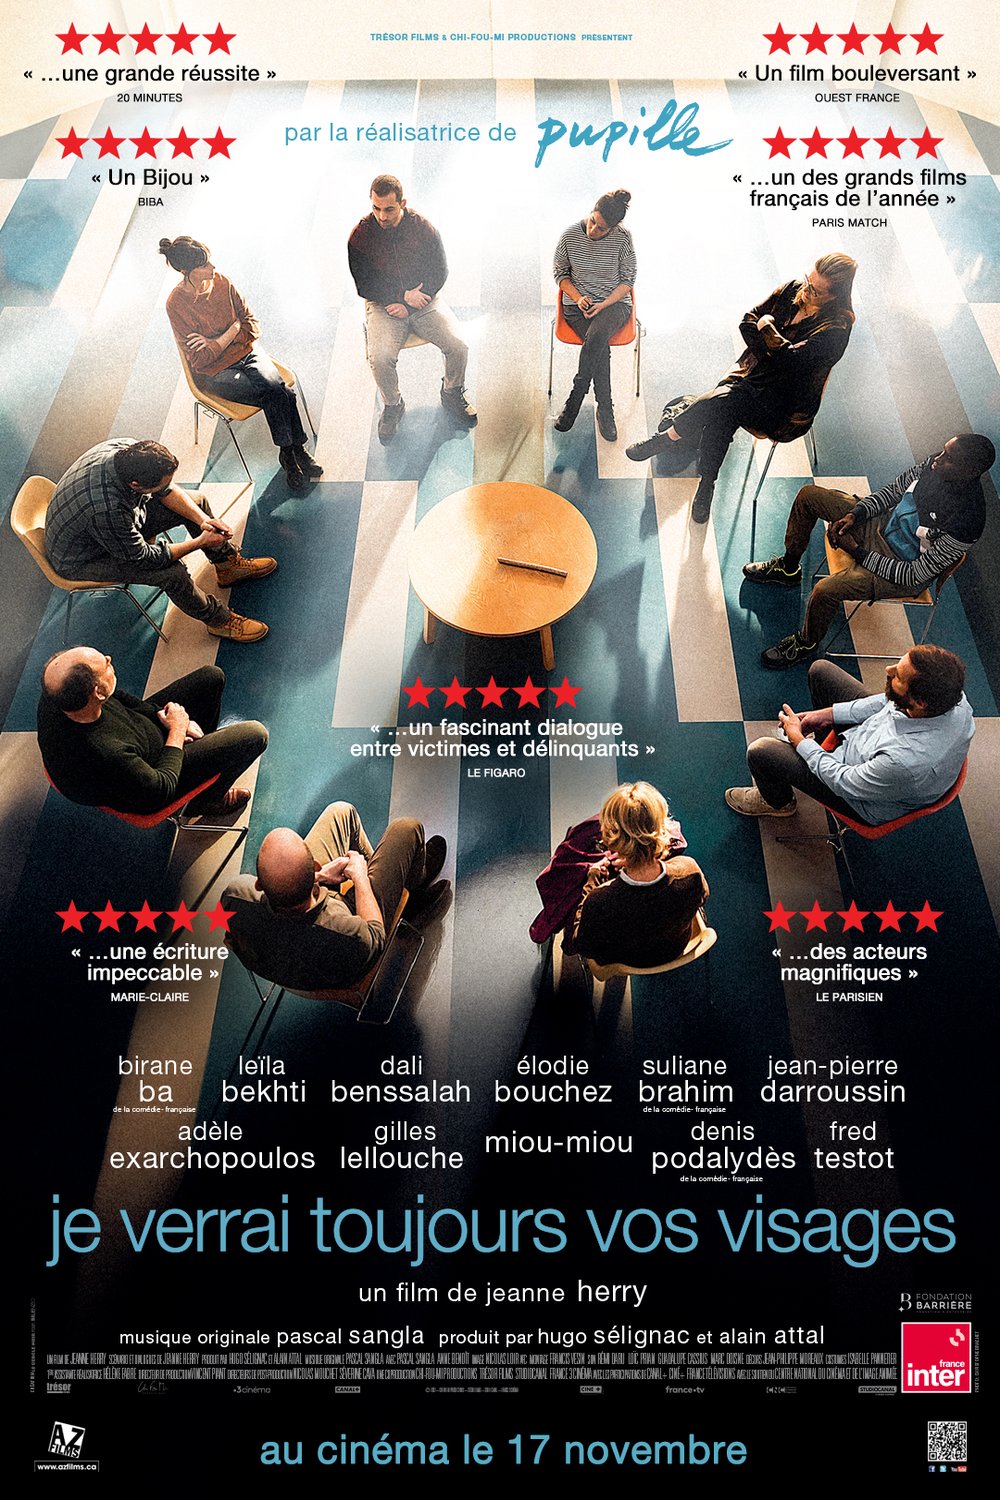 Poster of the movie Je verrai toujours vos visages